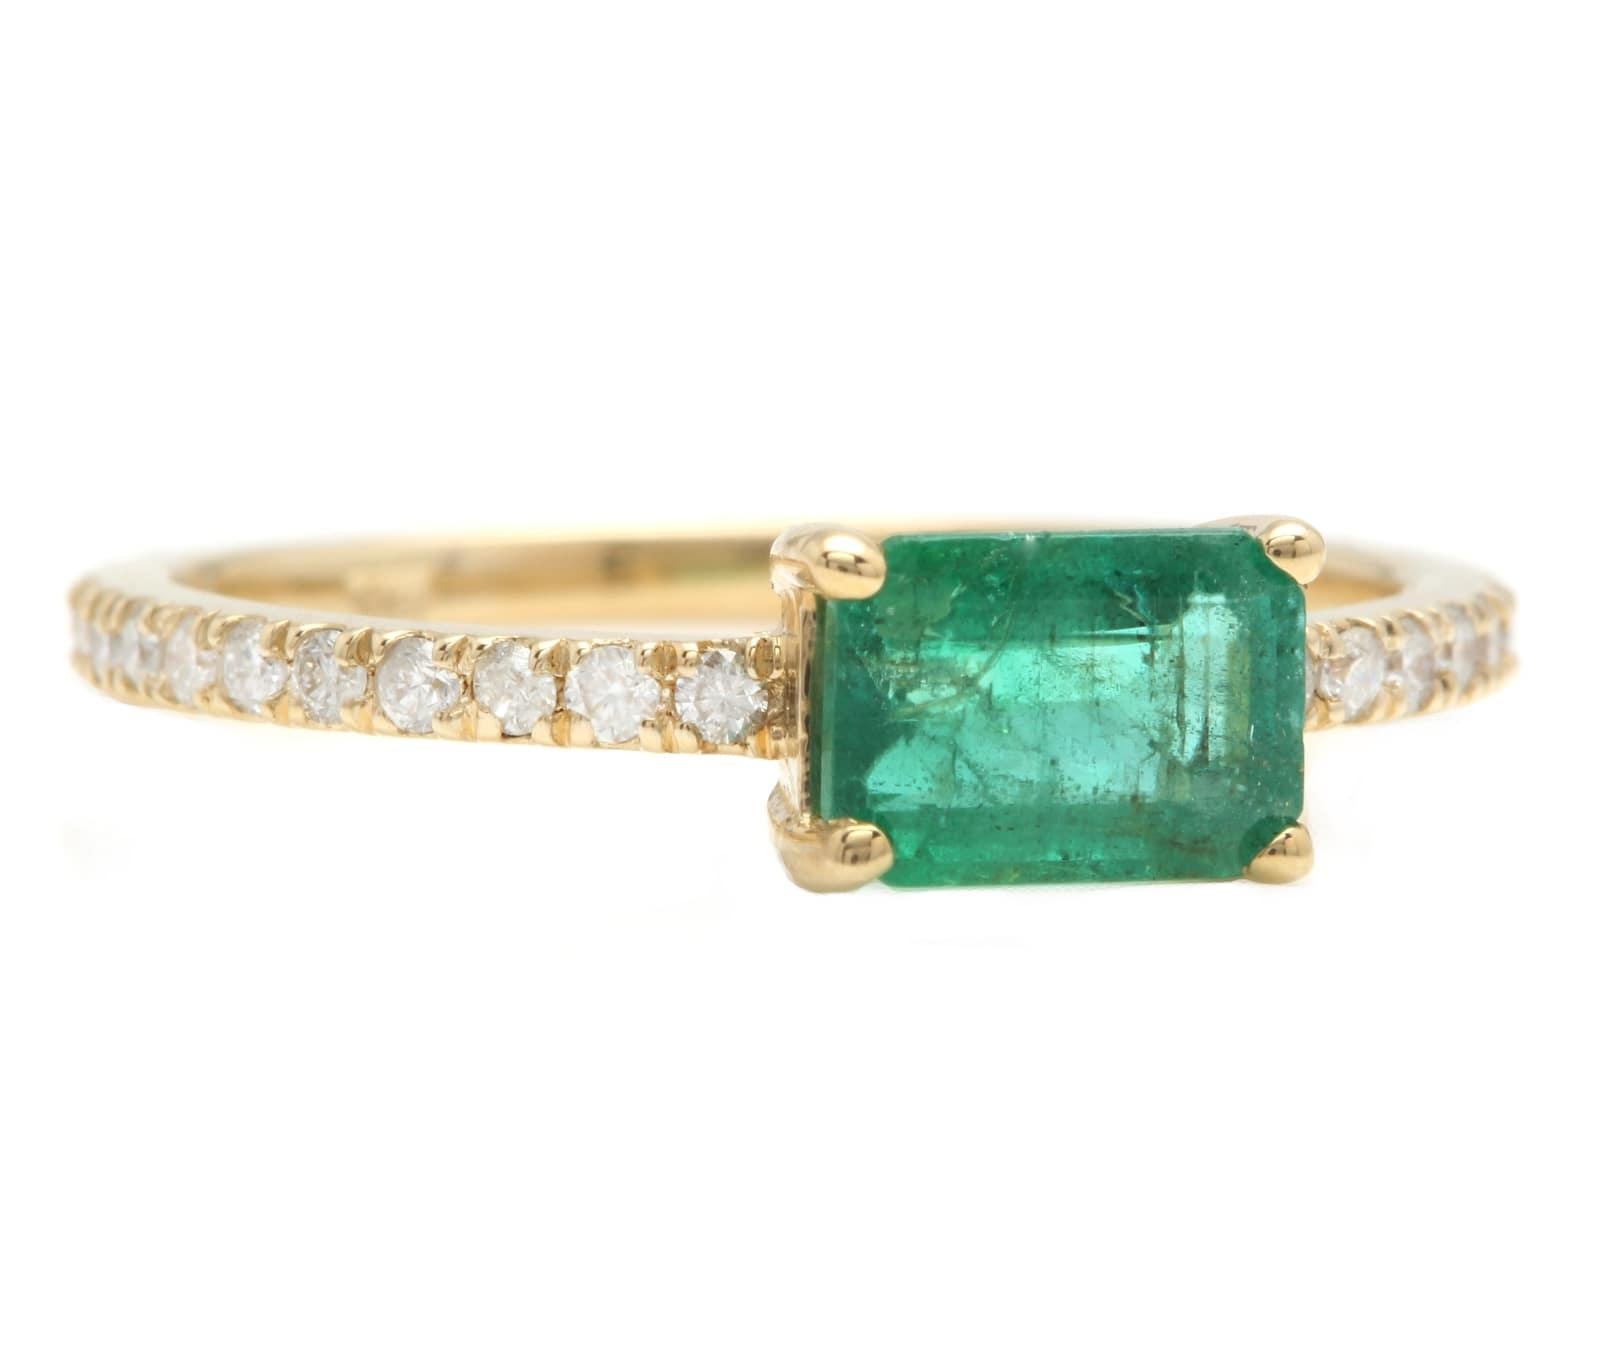 1.20 Carats Natural Emerald and Diamond 14K Solid Yellow Gold Ring

Suggested Replacement Value: $3,500.00

Total Natural Green Emerald Weight is: Approx. 0.90 Carats (transparent)

Emerald Measures: 7.00 x 5.00 mm

Natural Round Diamonds Weight: